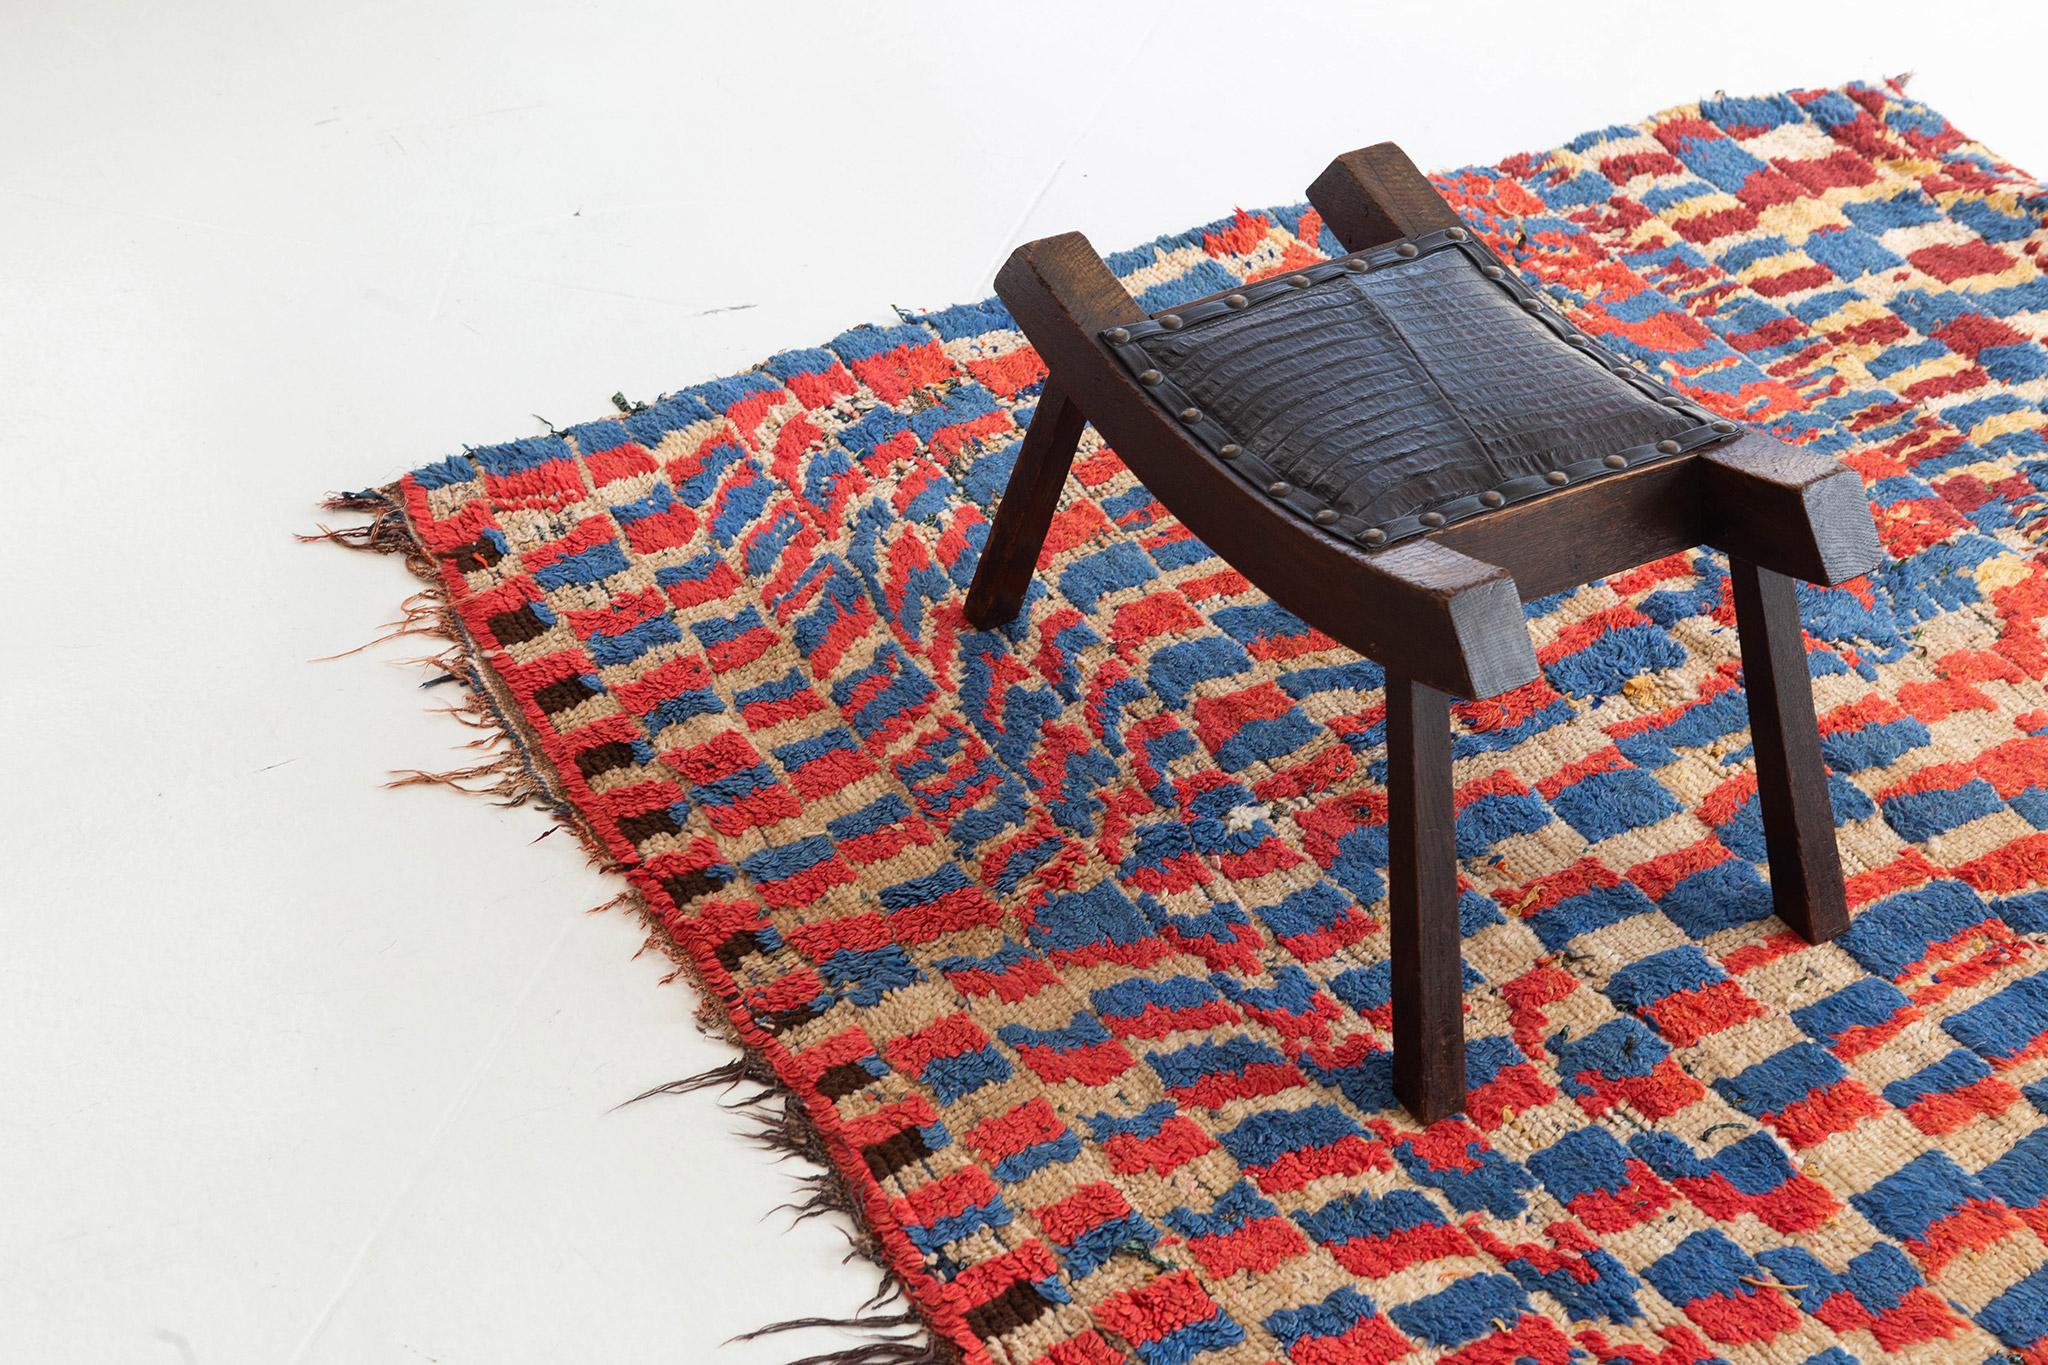 Near-square, eye-catching rug with an unstable checkerboard pattern, combining vivid blue, vermillion, rich brown, tan and pale gold. A vivid vintage tribal piece from the Atlas Mountains of Morocco.